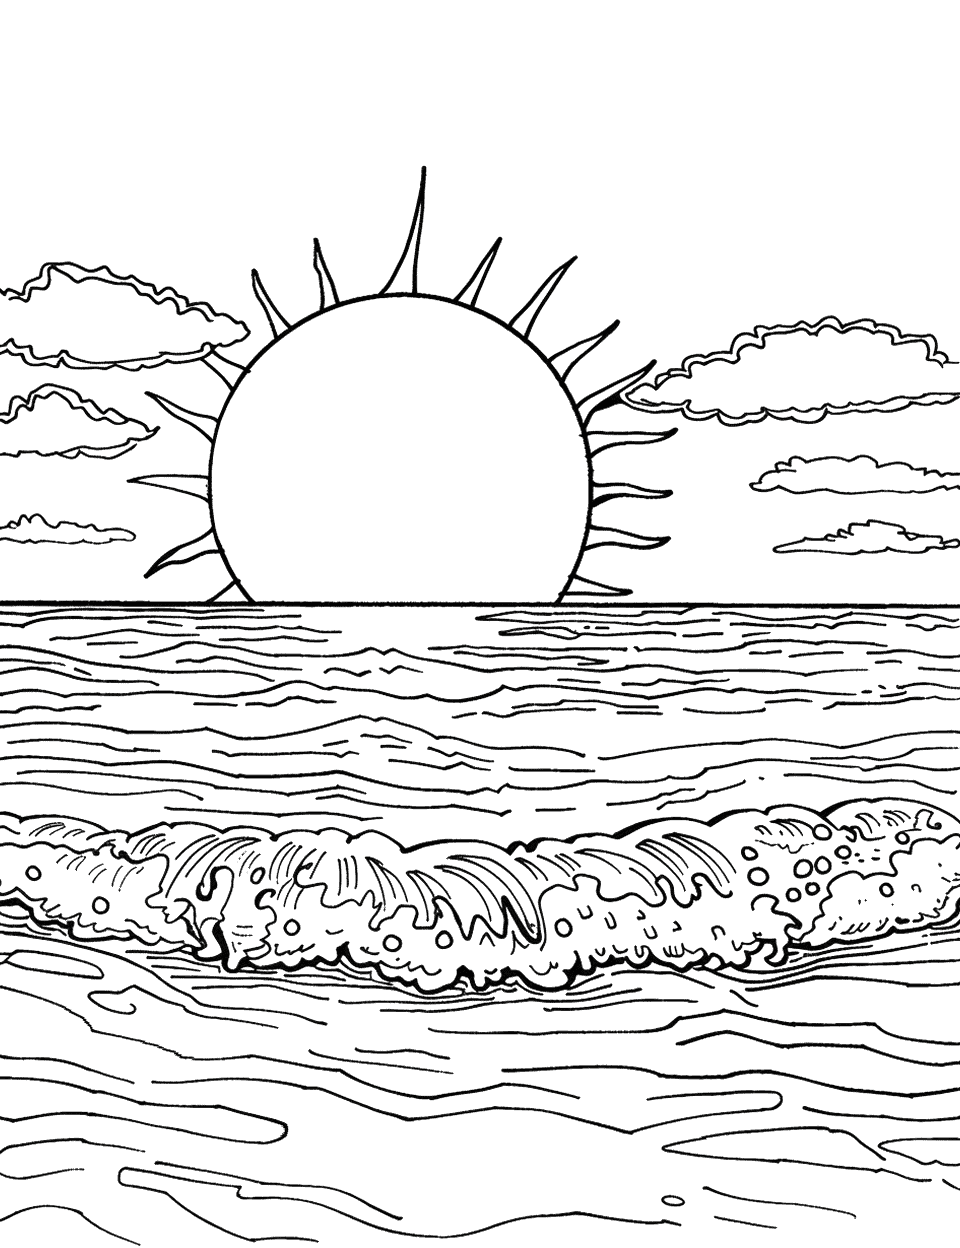 Dawn over the Ocean Sun Coloring Page - The early morning sun casting light over the ocean.